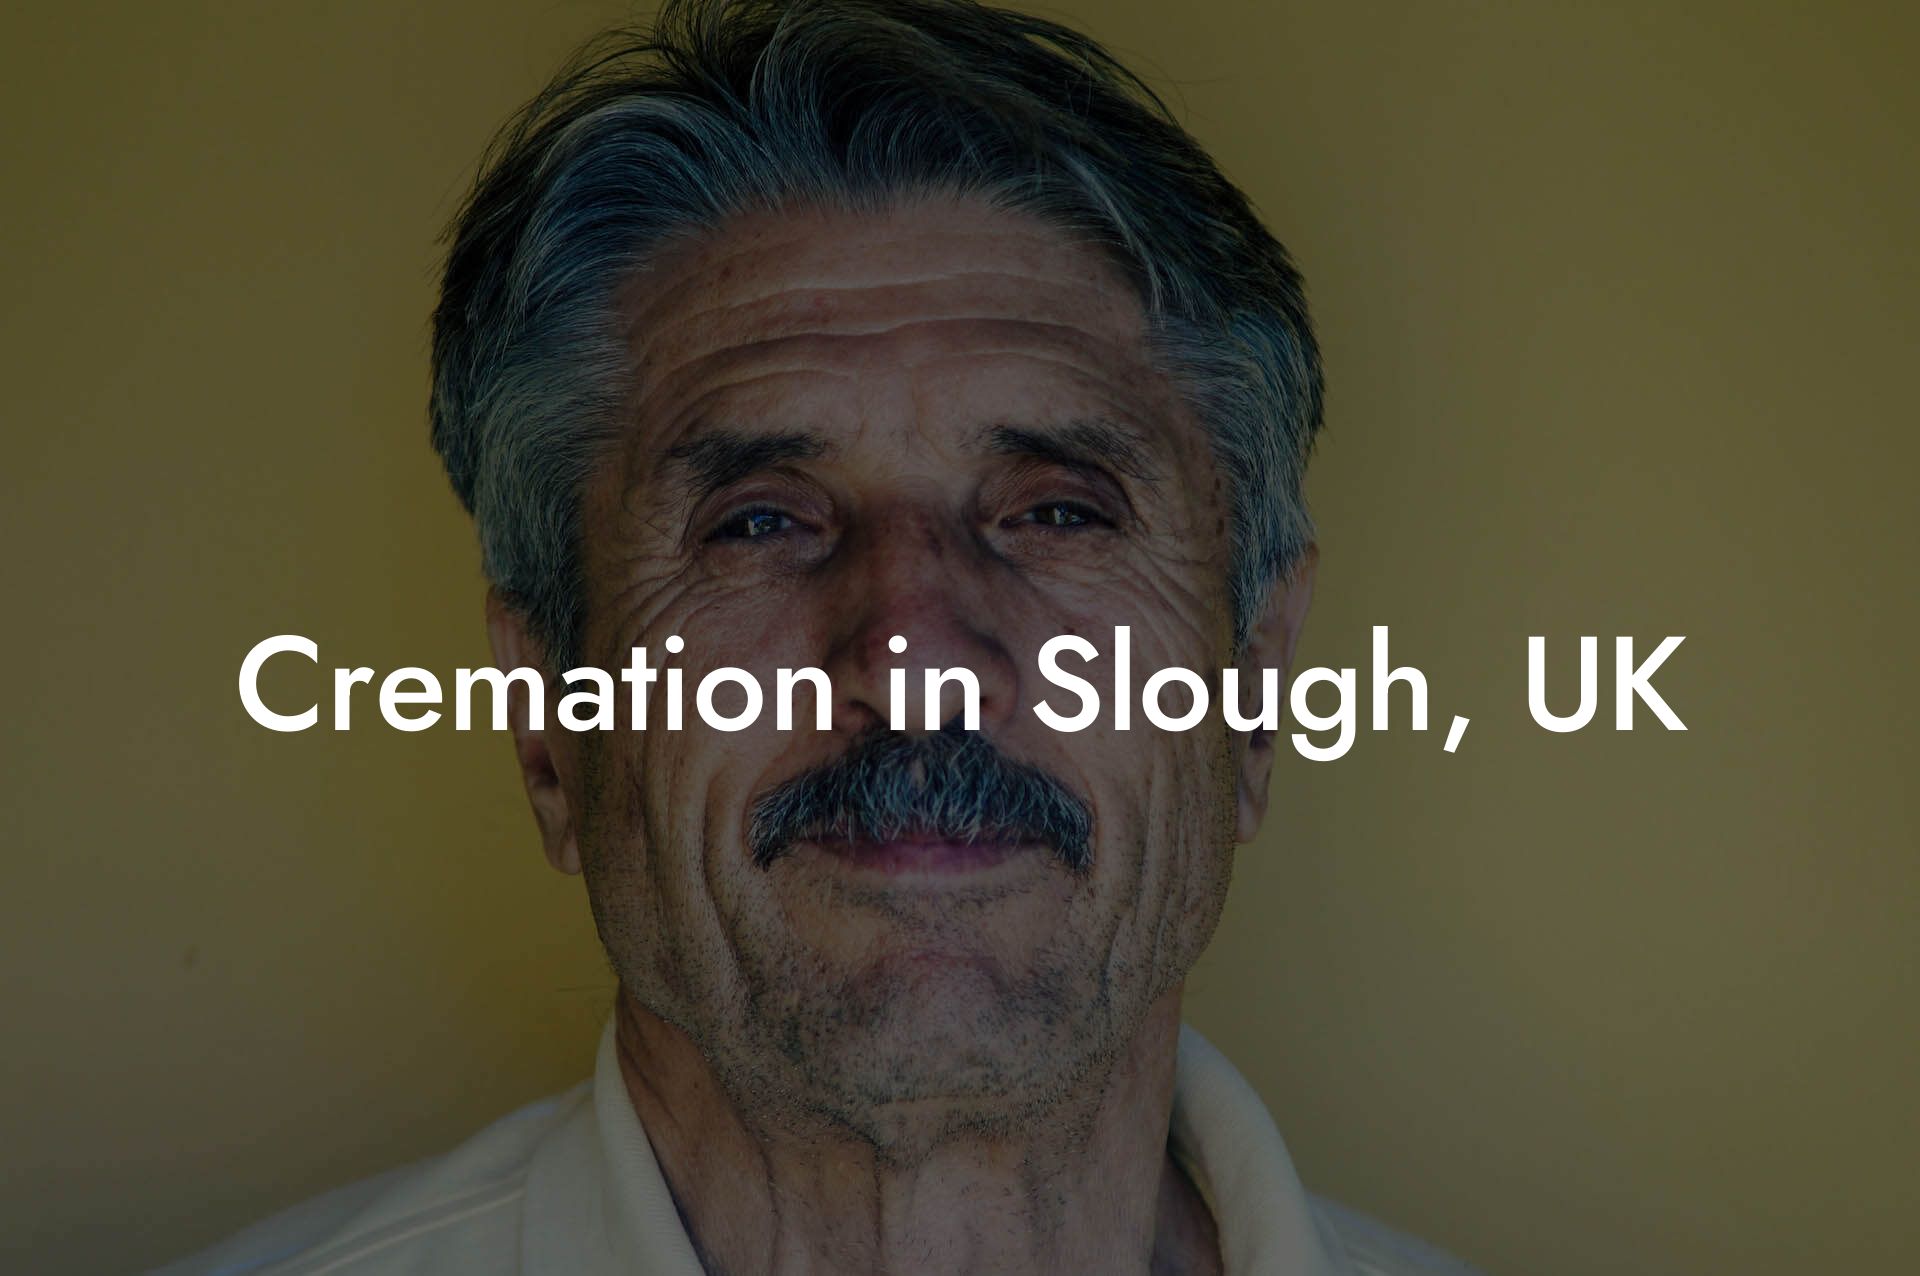 Cremation in Slough, UK